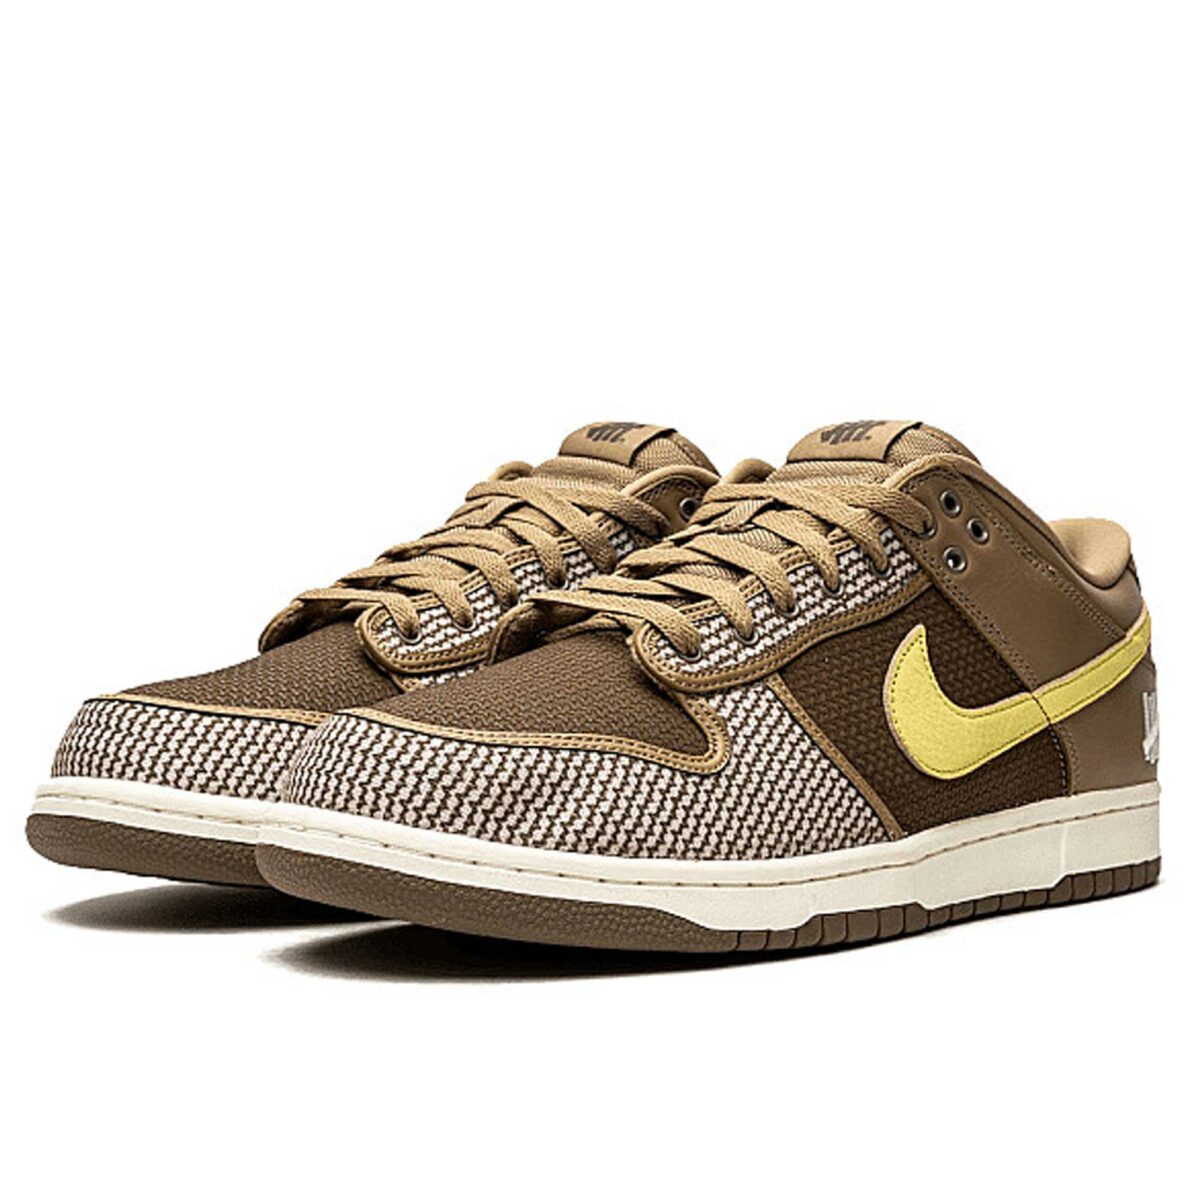 nike dunk low sp undefeated canteen dunk vs. AF1 pack DH3061_200 купить